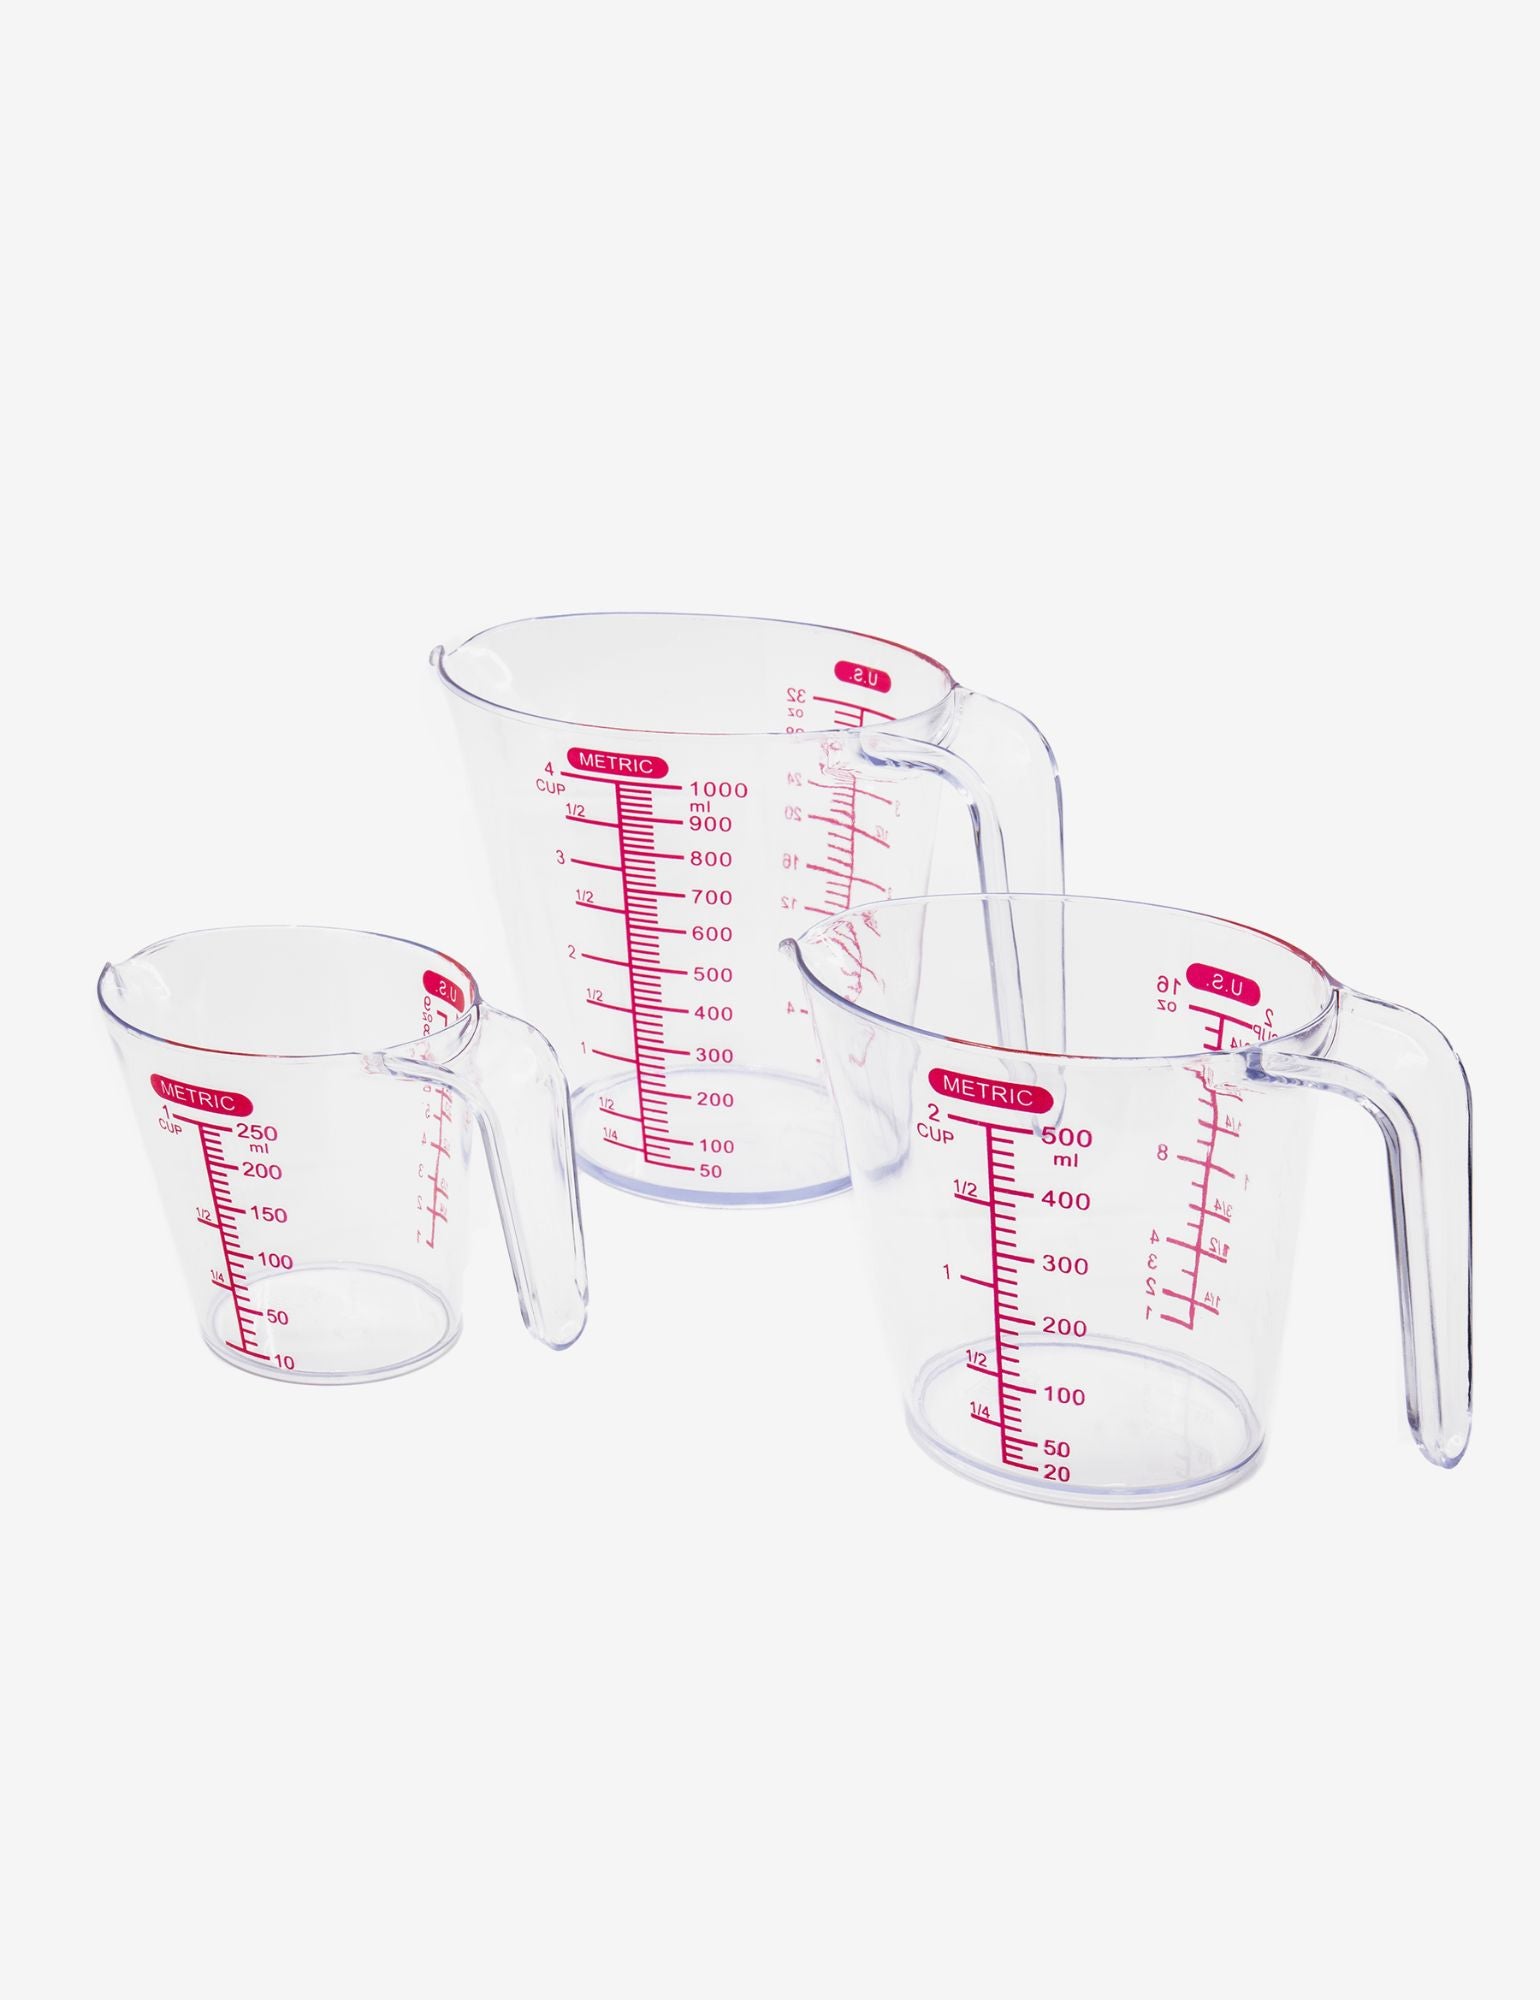 Measuring Cup, 1/3 cup, dishwasher safe, stainless steel (1 each minimum  order)